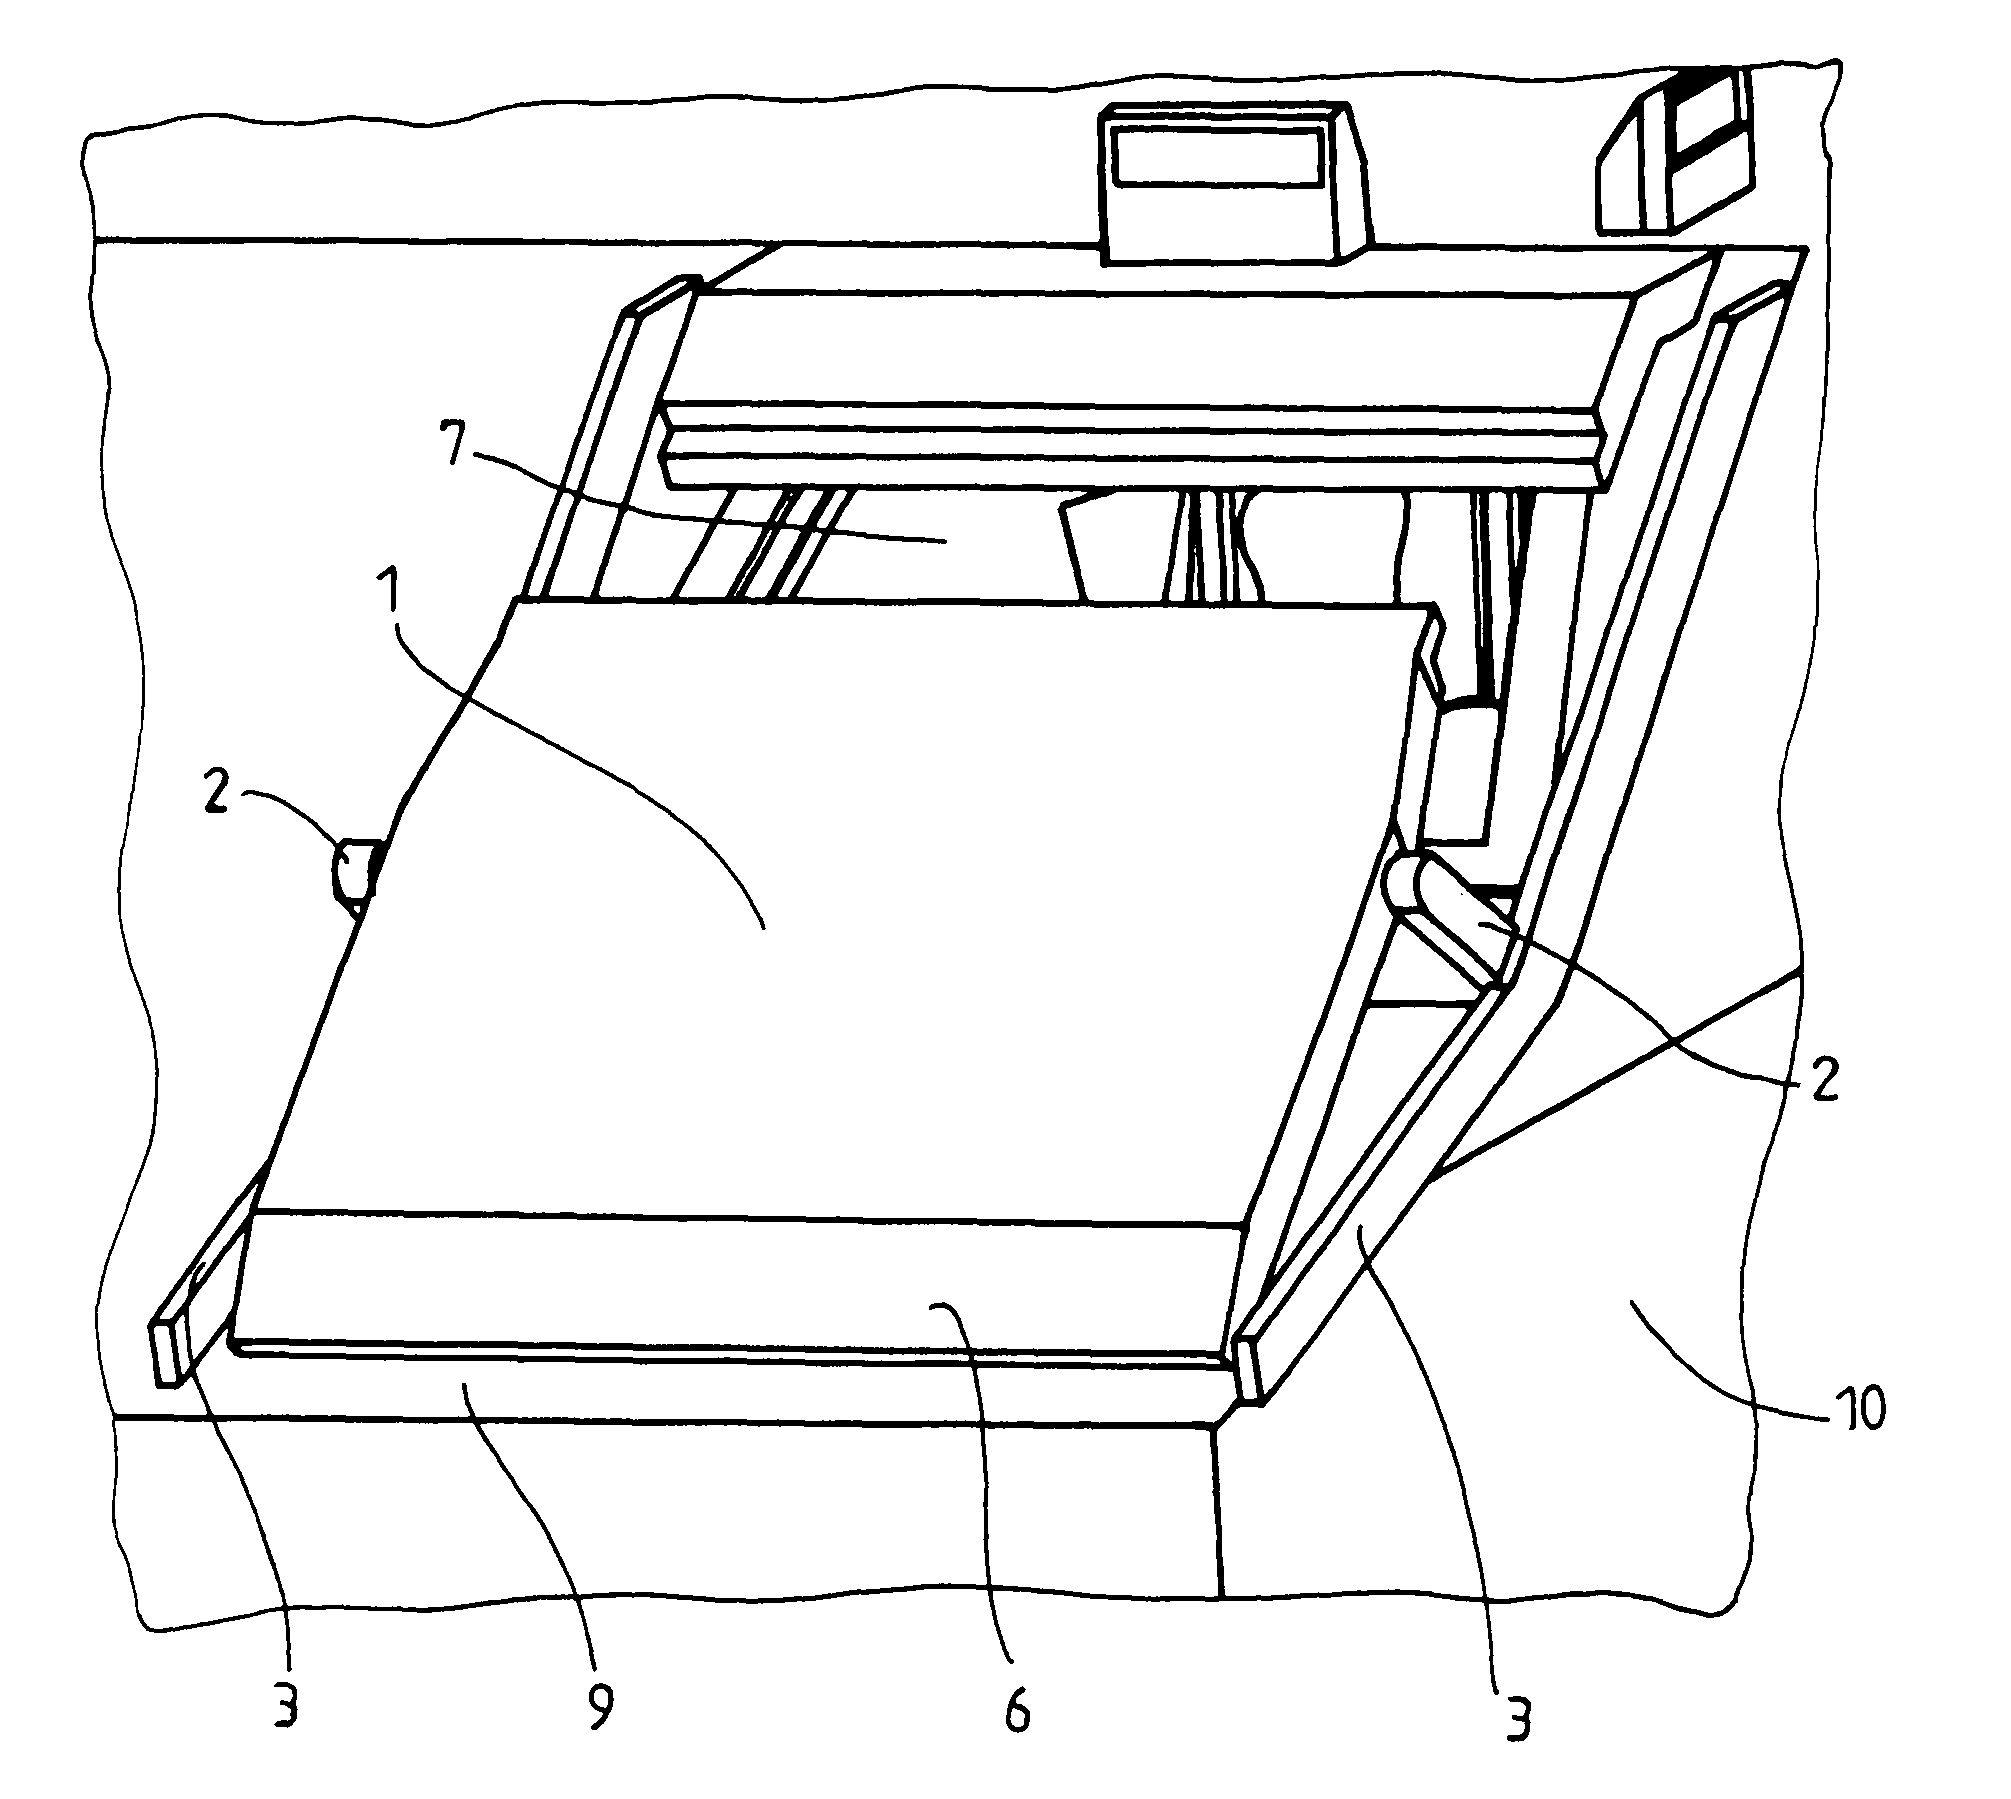 Protection device for an observation screen of a vehicle